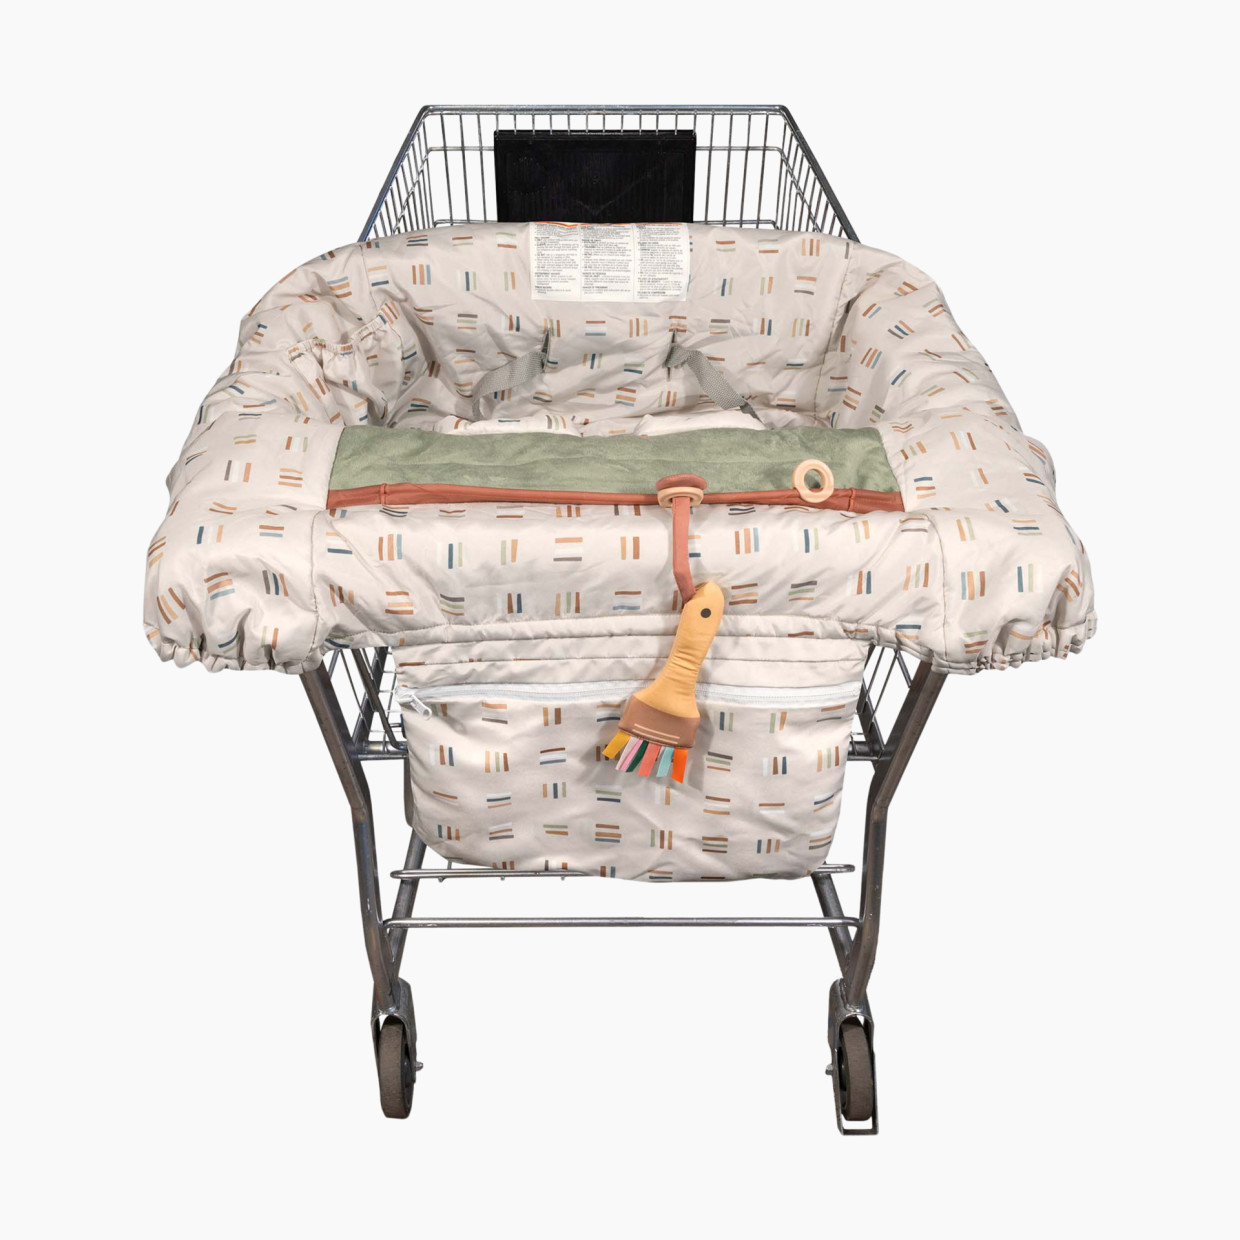 Boppy Preferred Shopping Cart Cover - Paintbox.